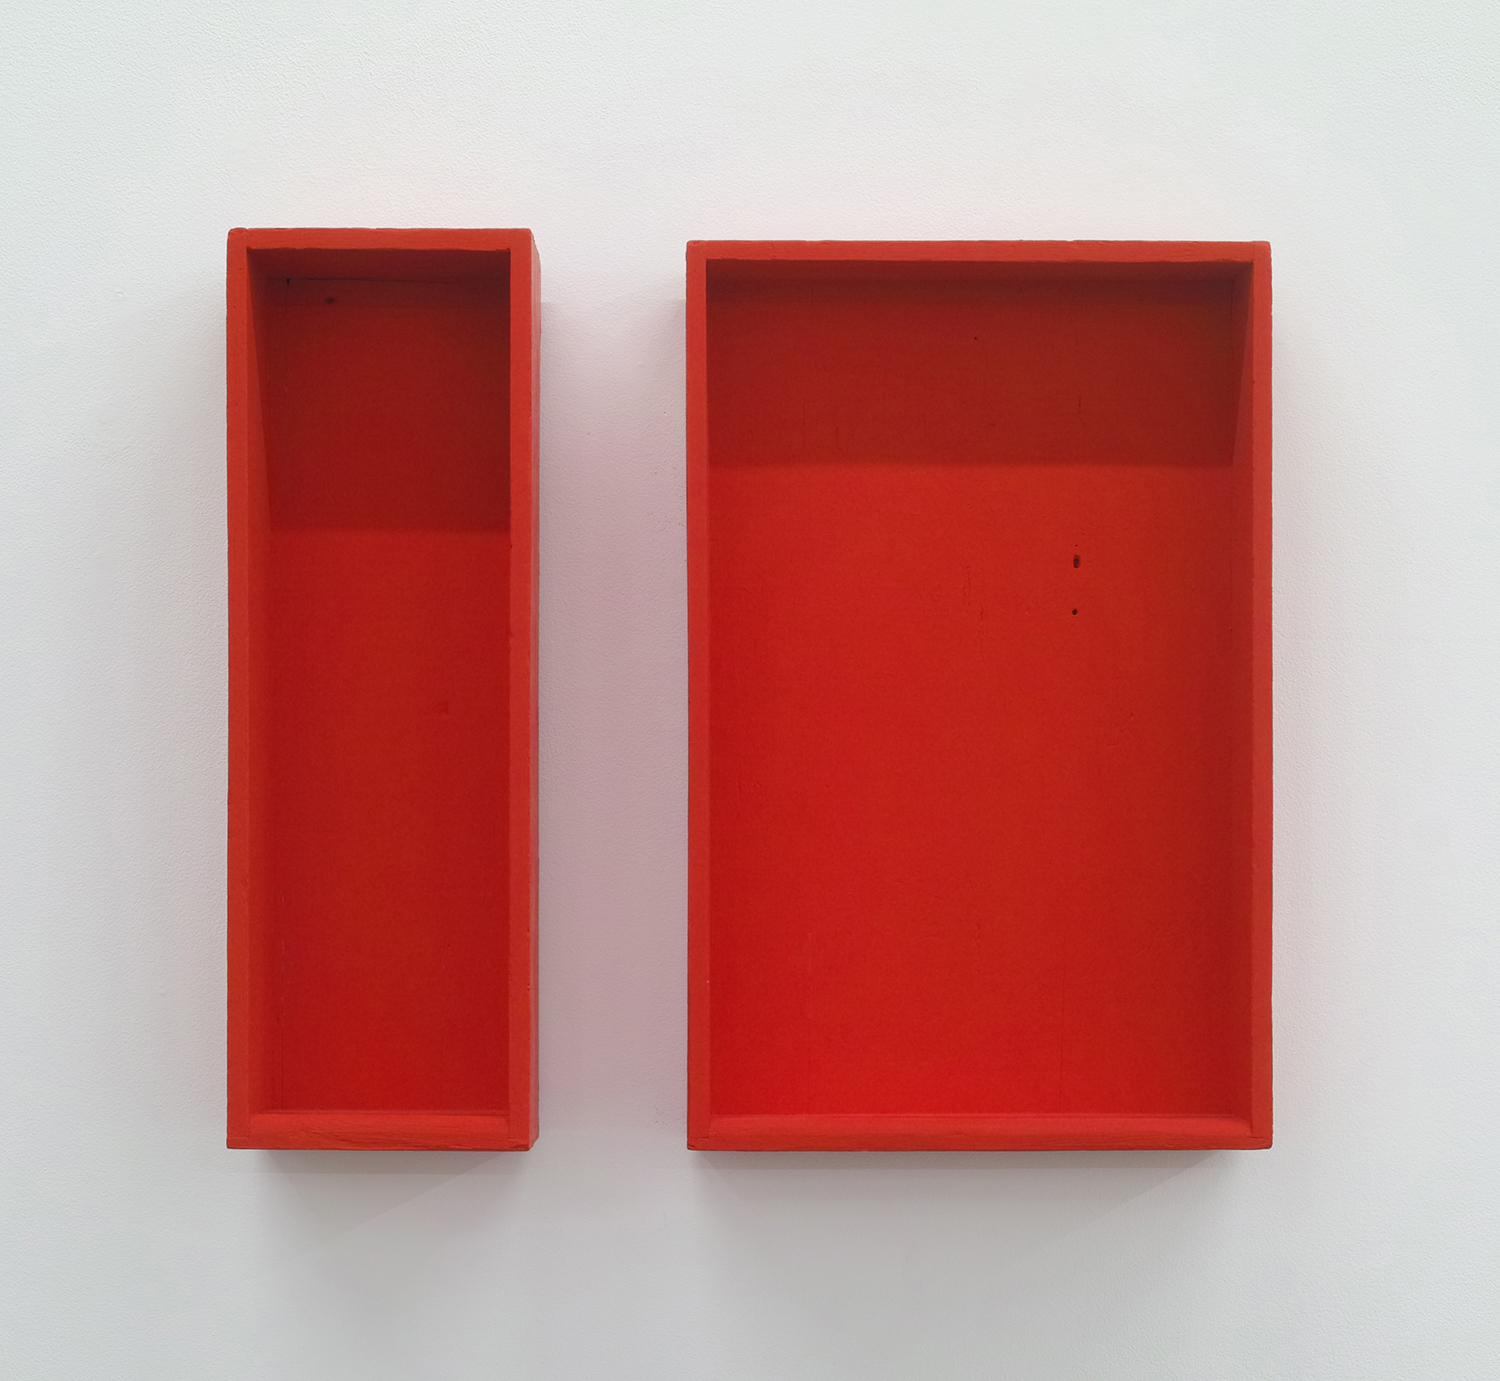 Text No. 14 & 13<br>acrylic on wood, set of 2<br>327 x 208 x 53 mm,  327 x 106 x 70 mm<br>1998